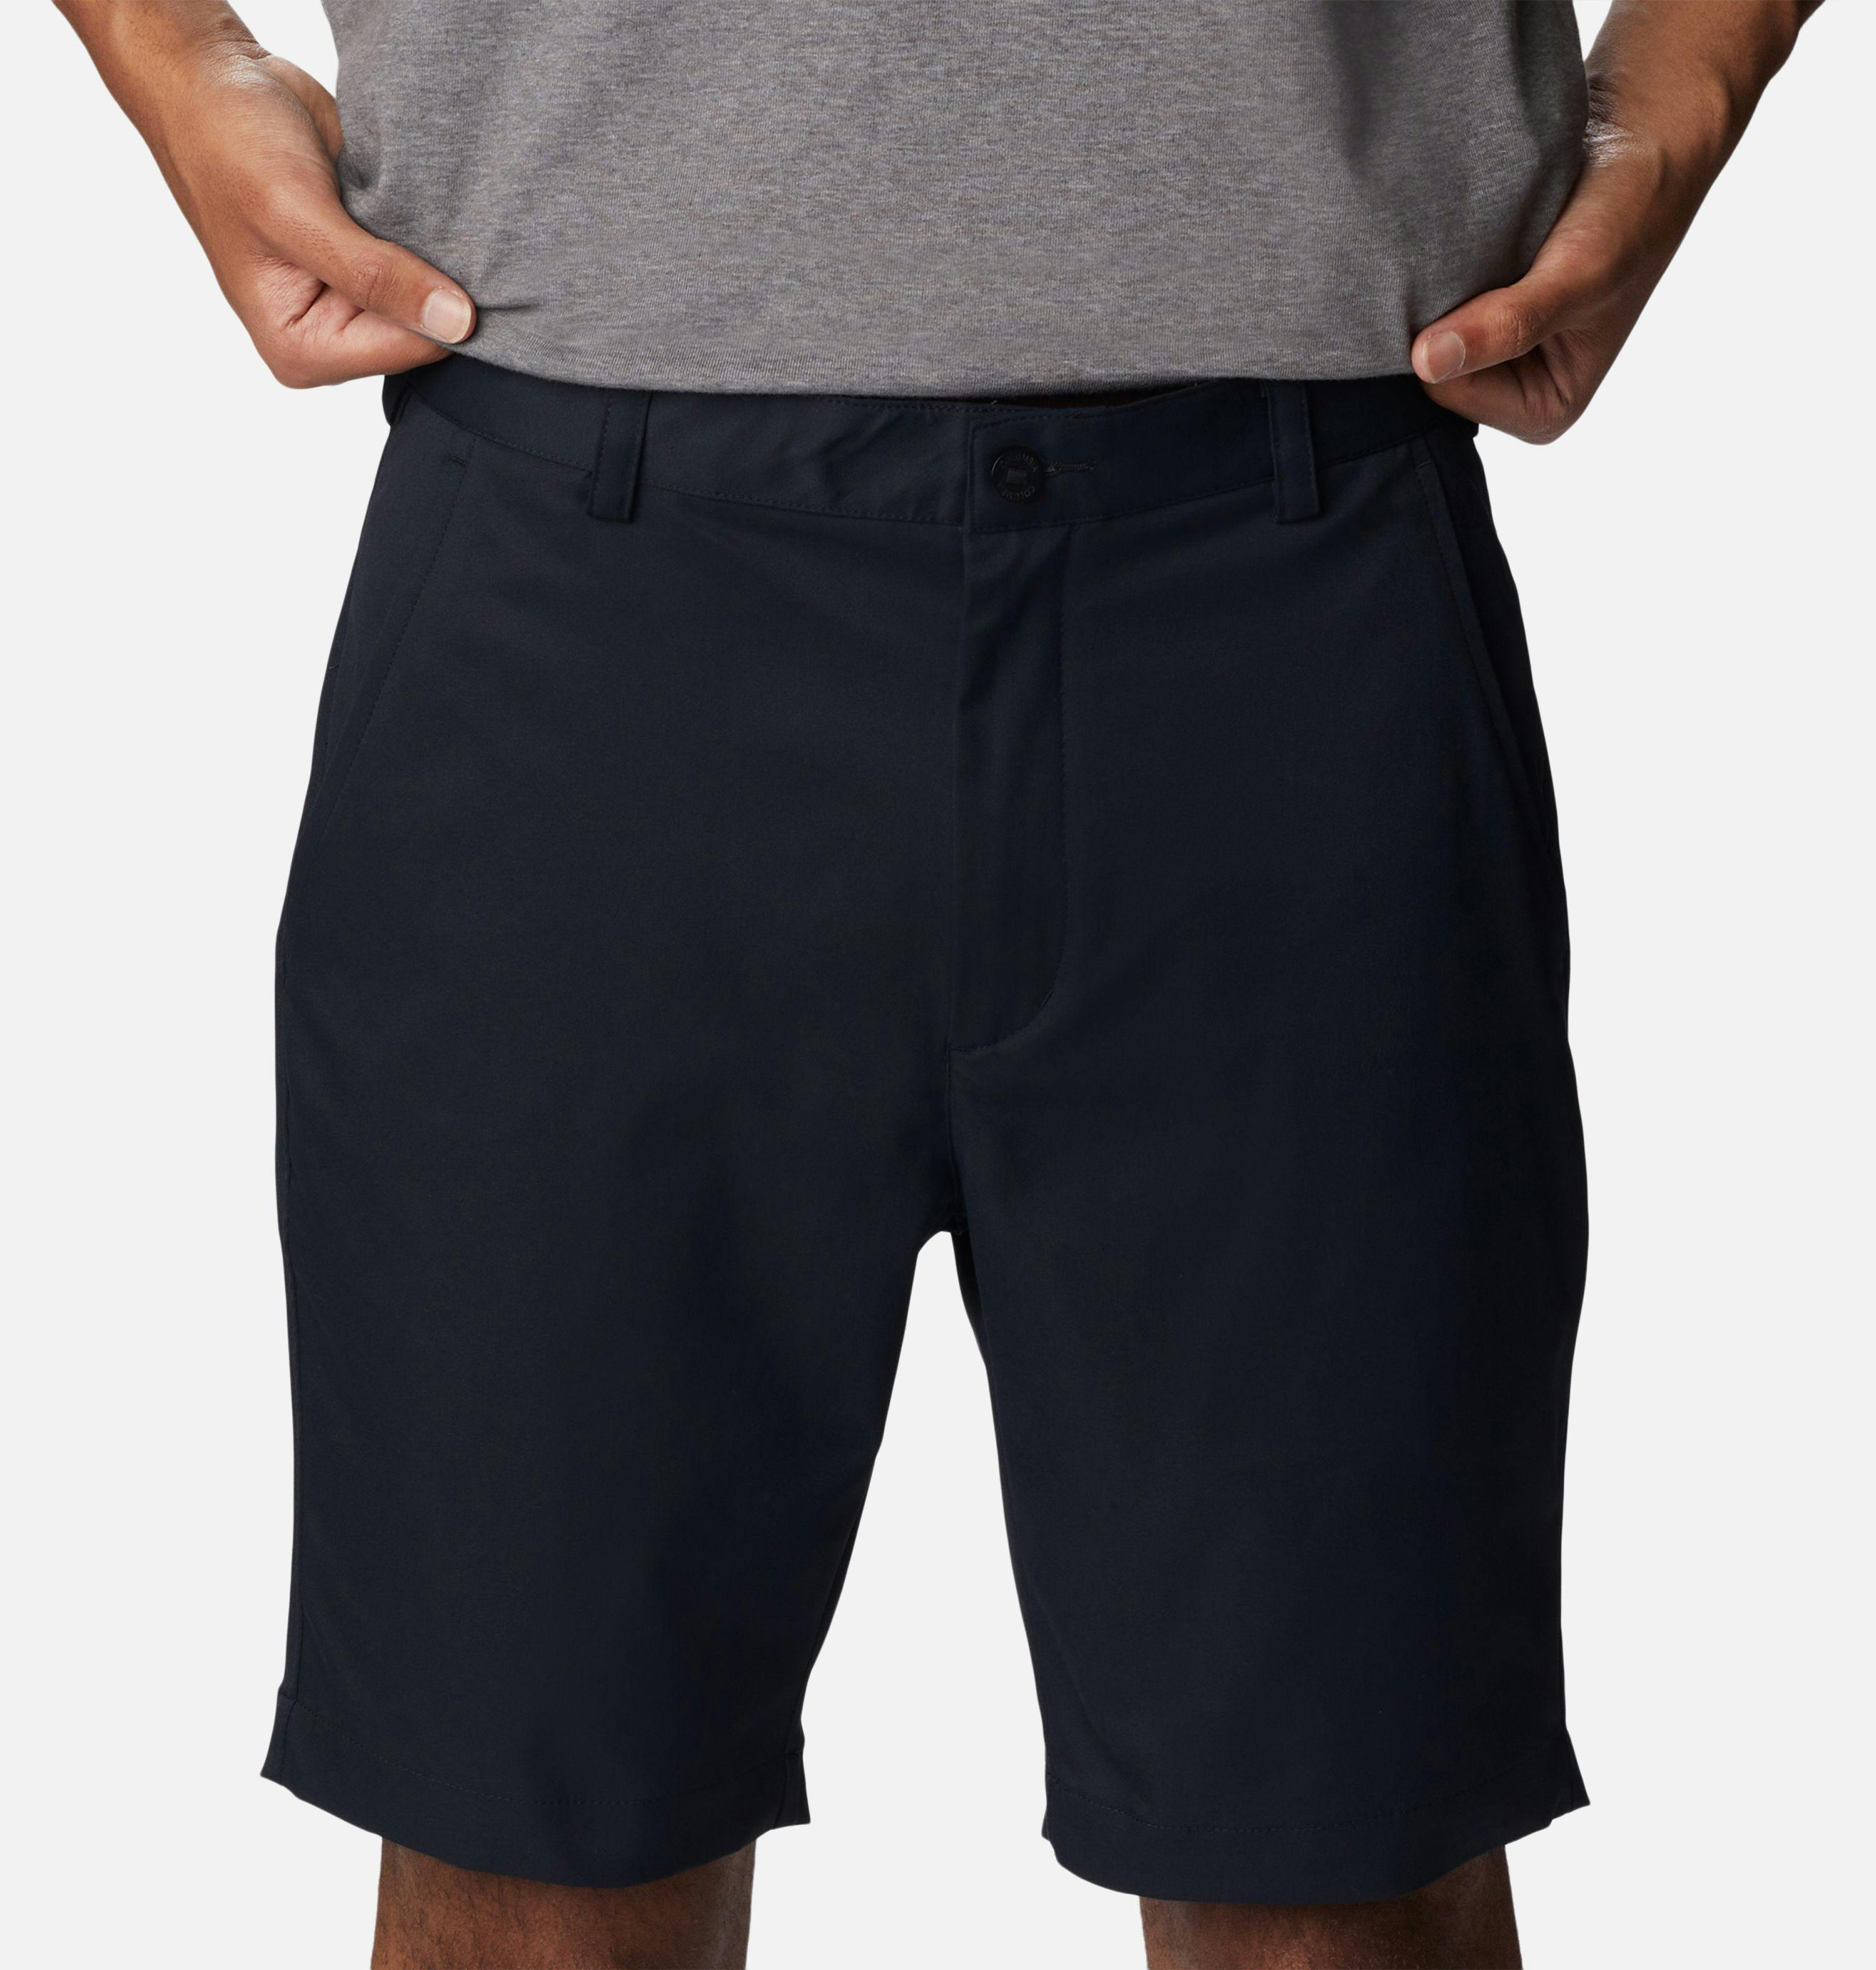 Columbia Men's Omni-Wick Lie Angle Short | Curated.com